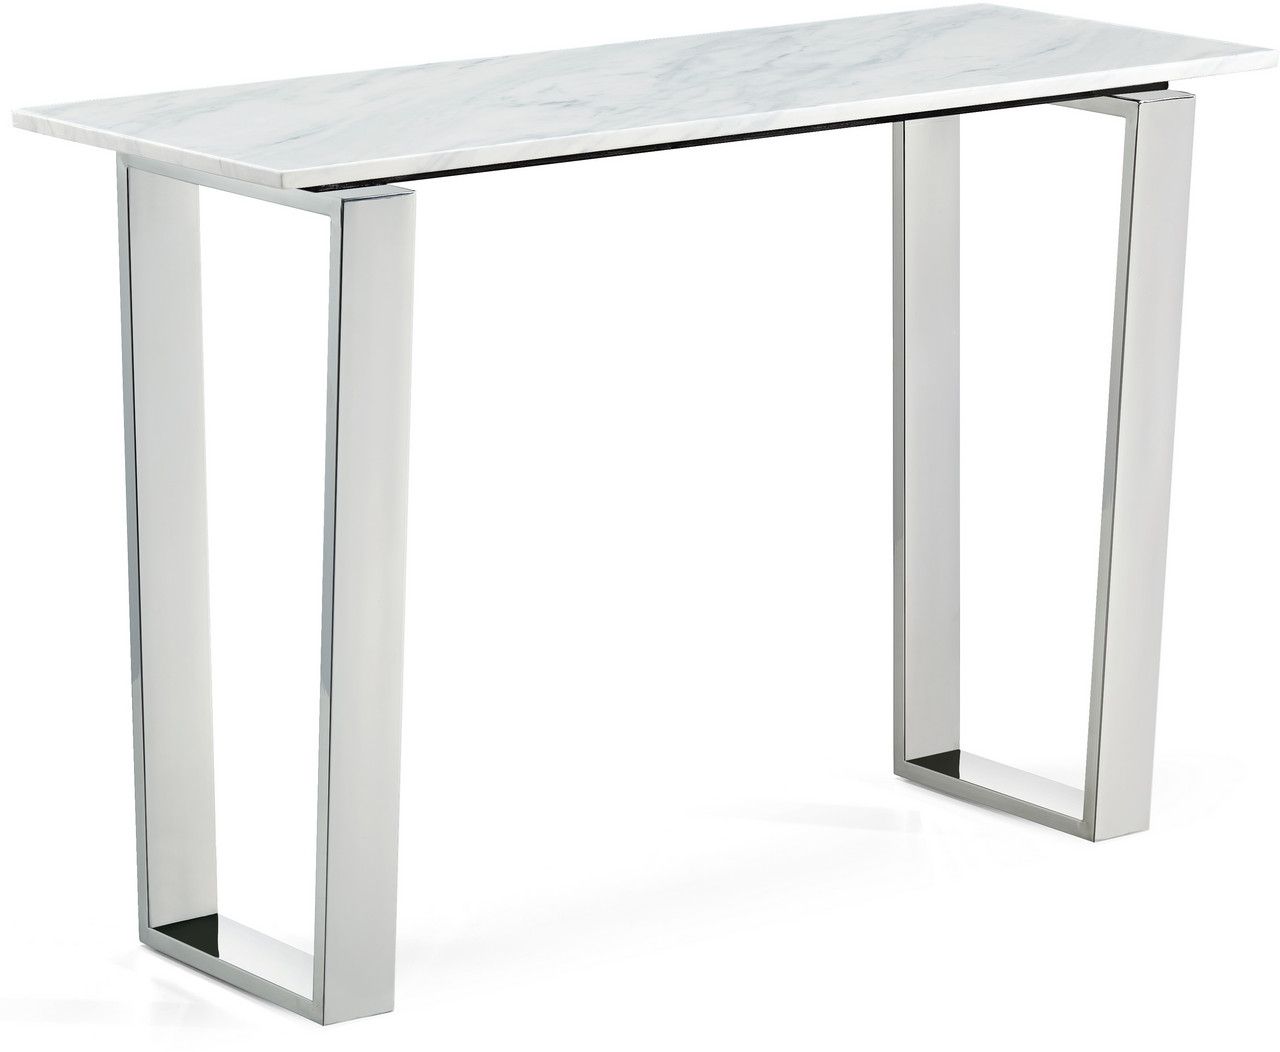 Owen Contemporary Genuine Marble Top Sofa Table W/chrome Stainless Within Silver Stainless Steel Console Tables (View 7 of 20)